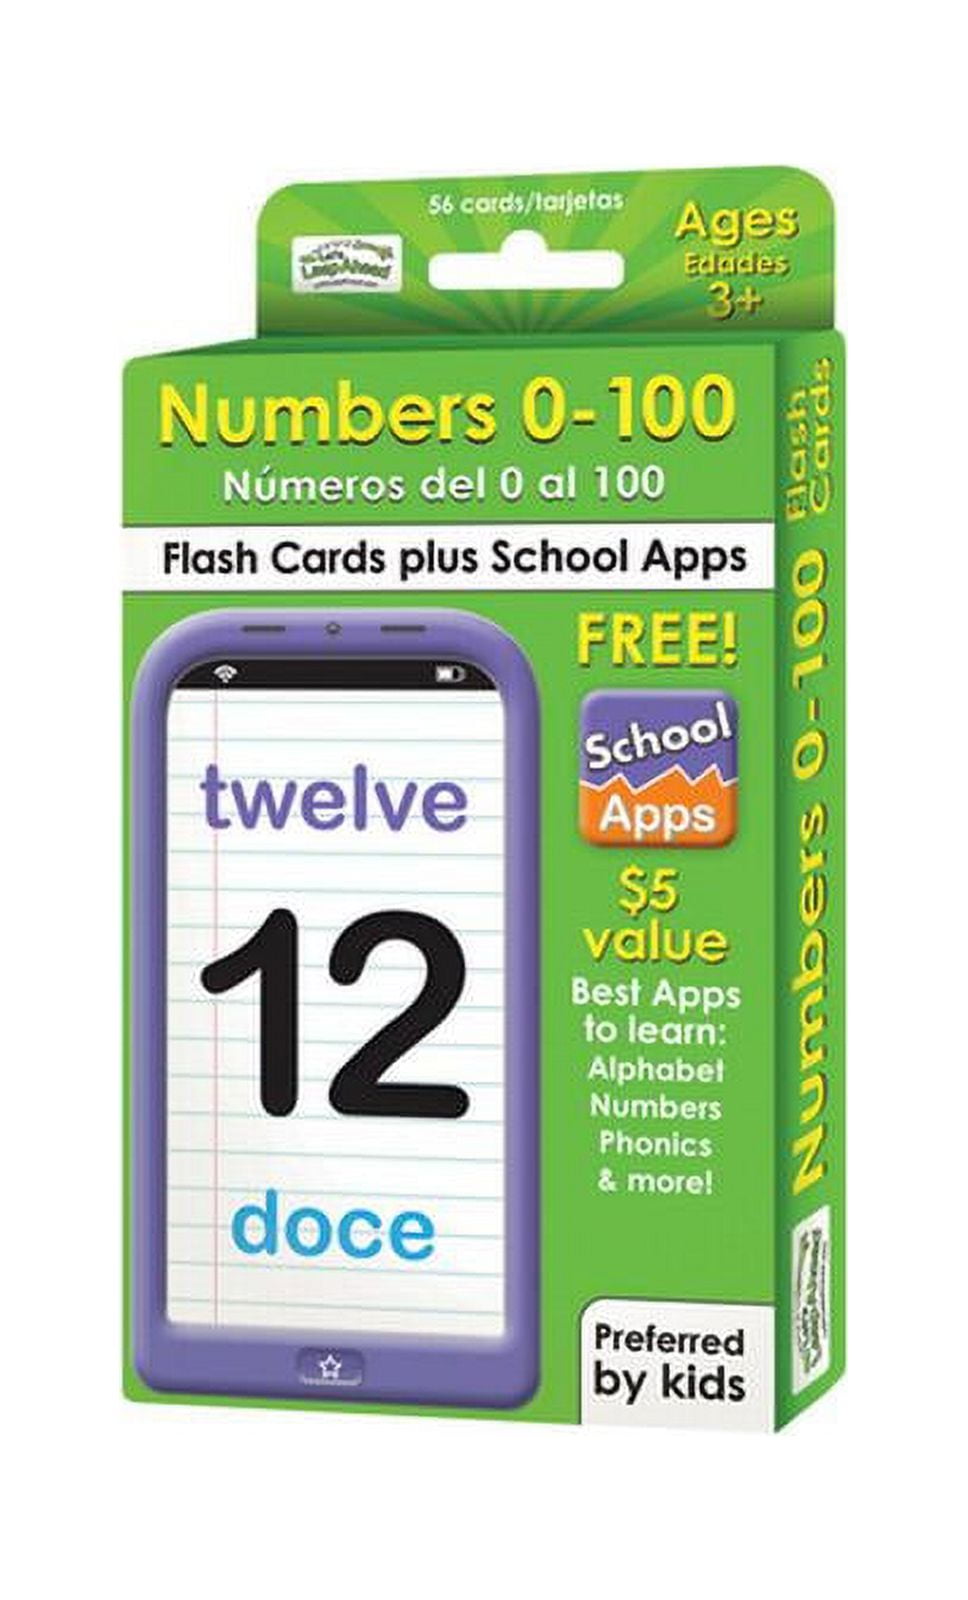 New Preschool Materials - What Would You Buy with $100? - No Time For Flash  Cards